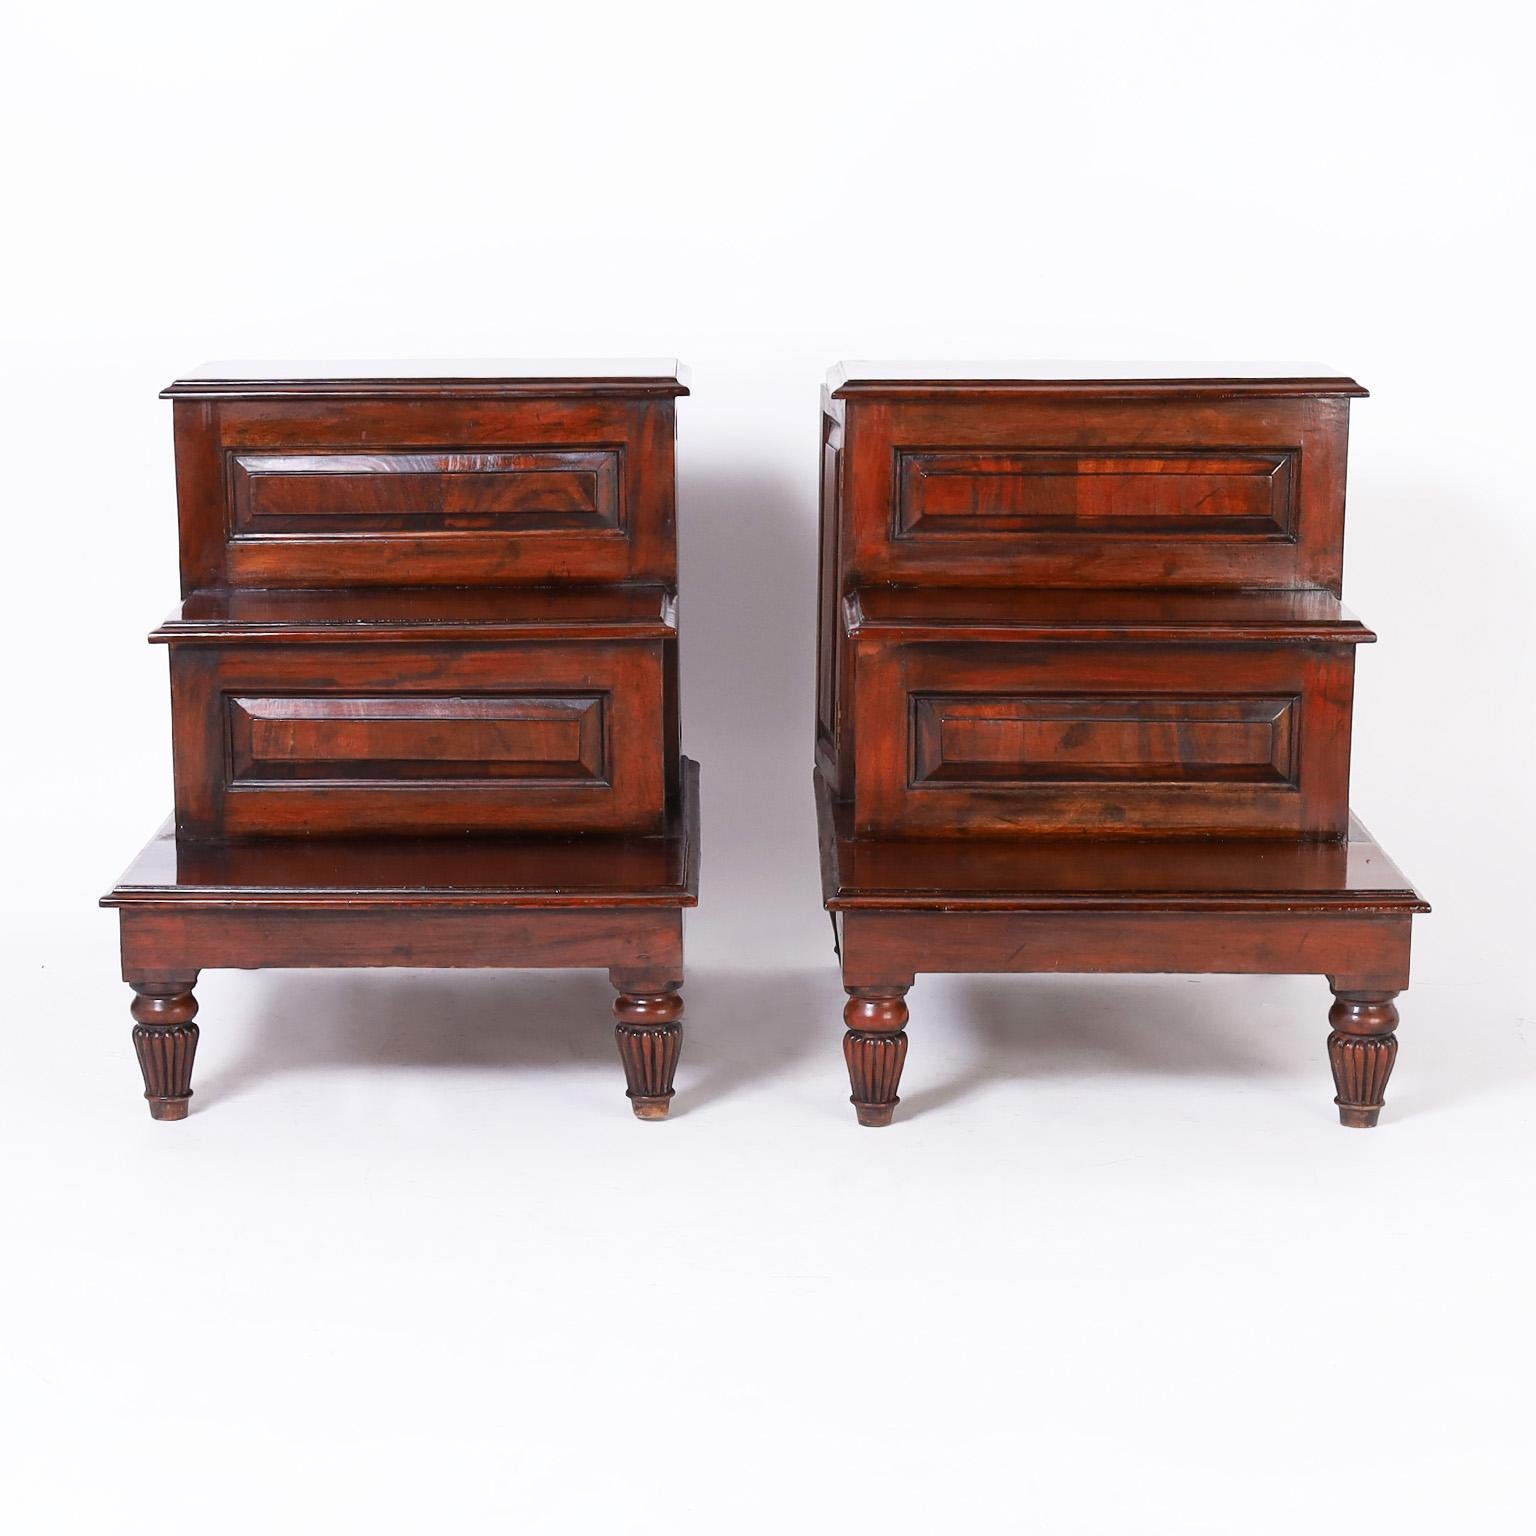 Rare pair of 19th century English stands or tables crafted in mahogany featuring a step down form with paneled sides, hidden storage and turned and fluted legs.